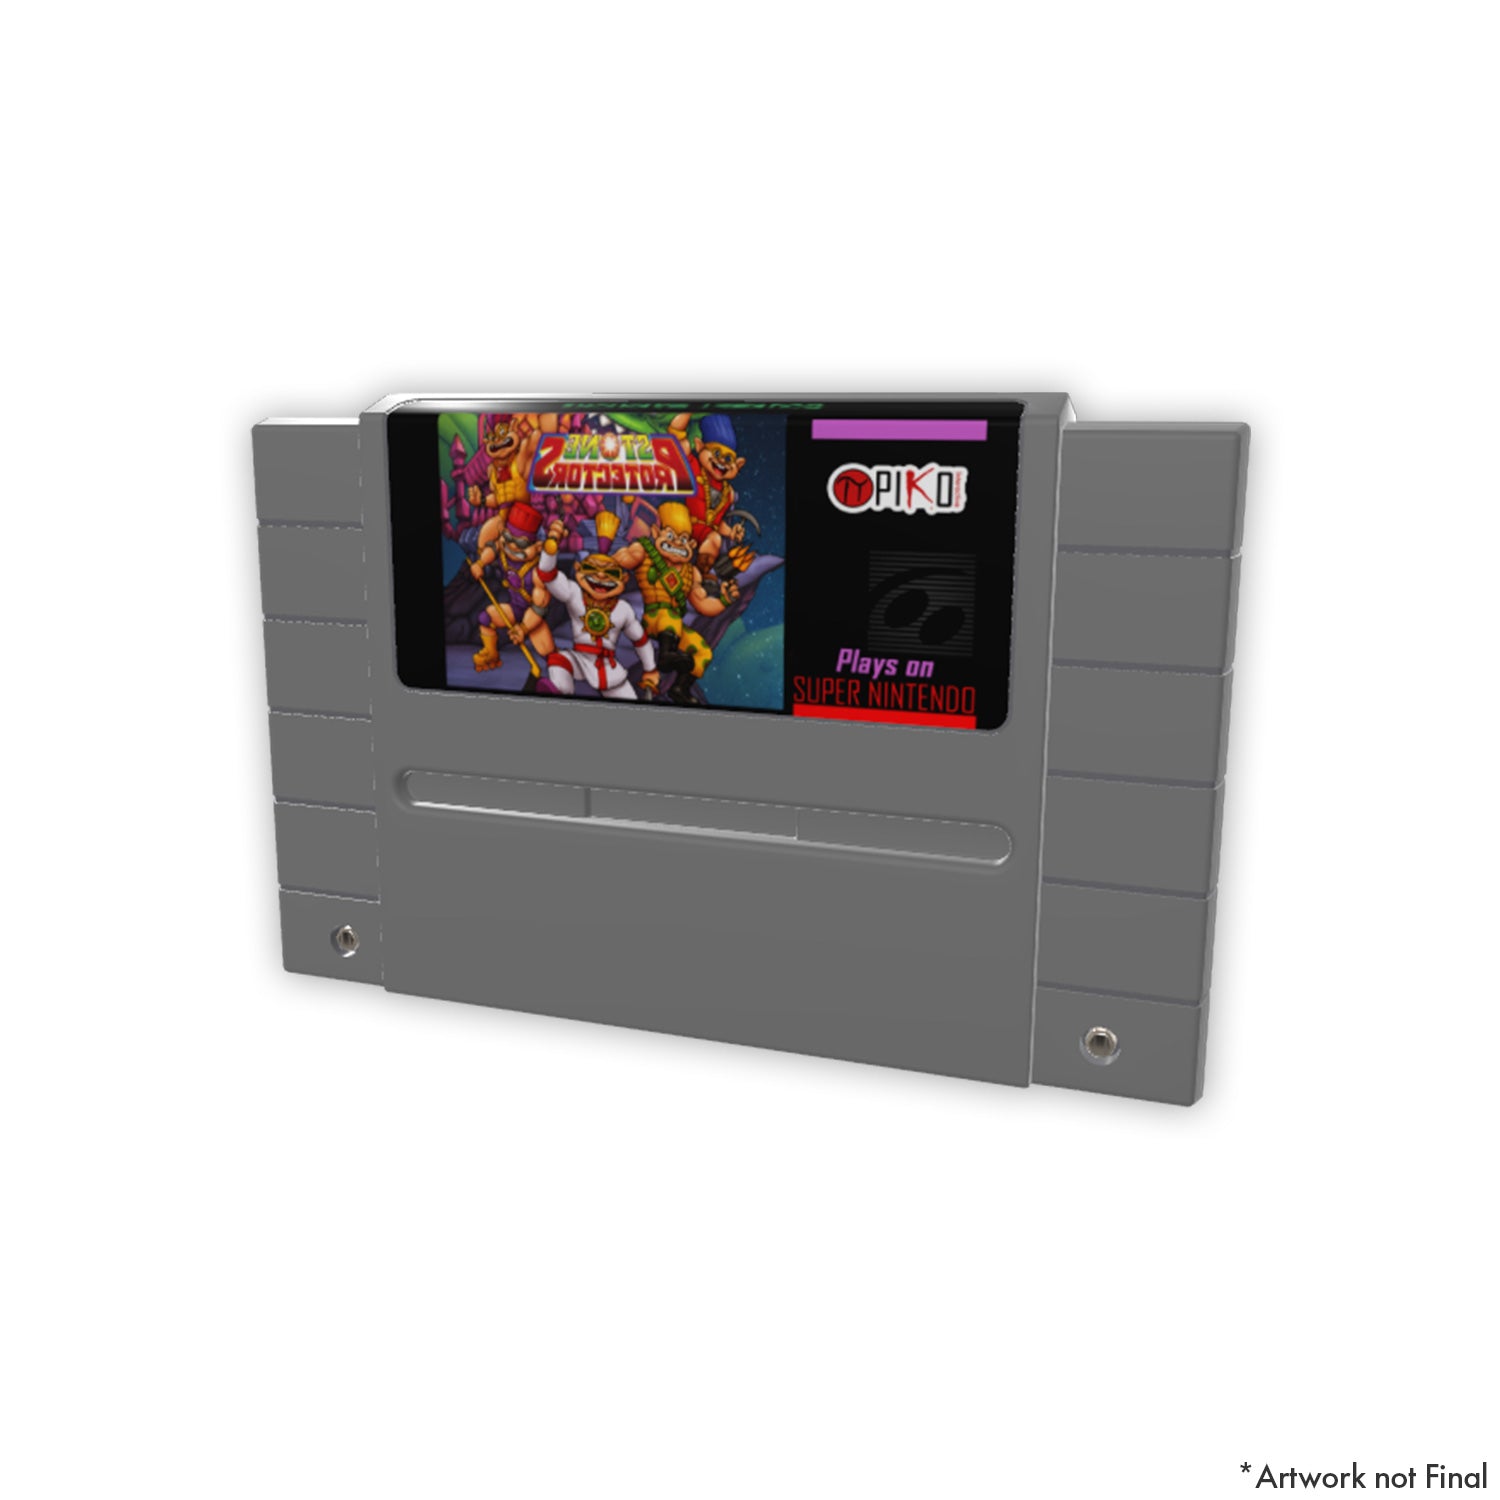 Stone Protectors Limited Edition (SNES)